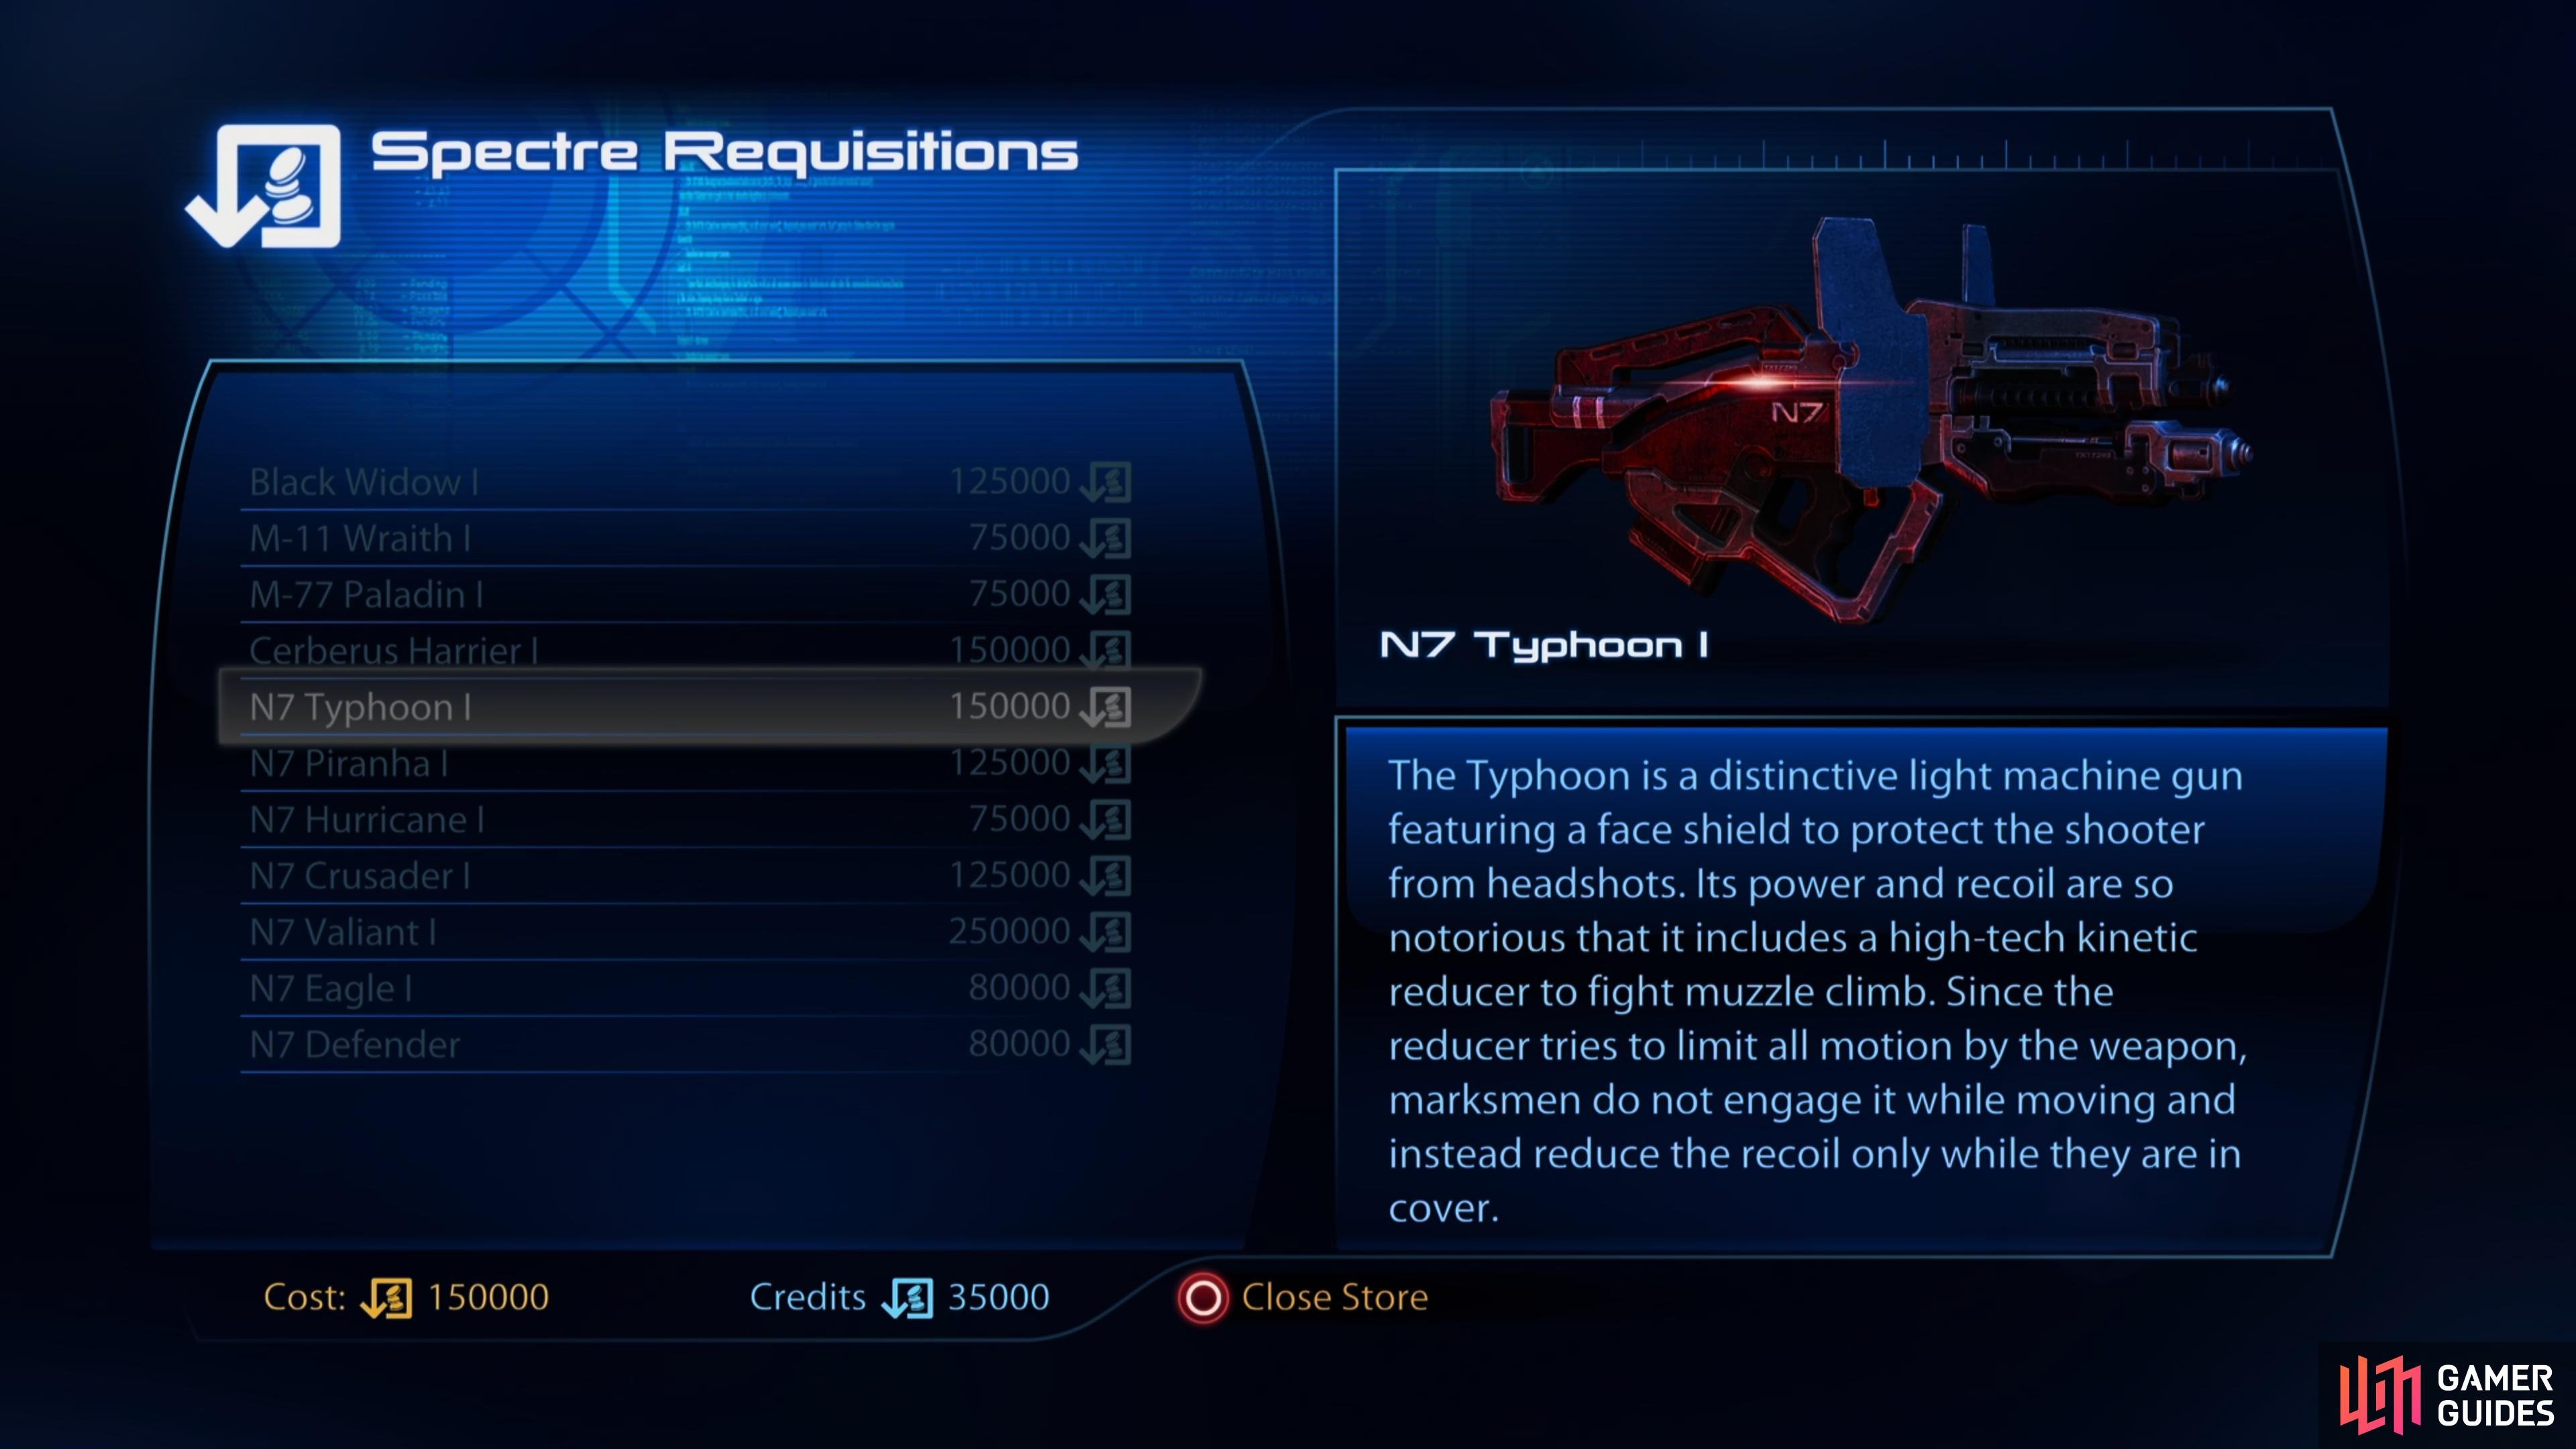 in the Spectre Offices you can access high-end weaponry via the Spectre Requisitions terminal,